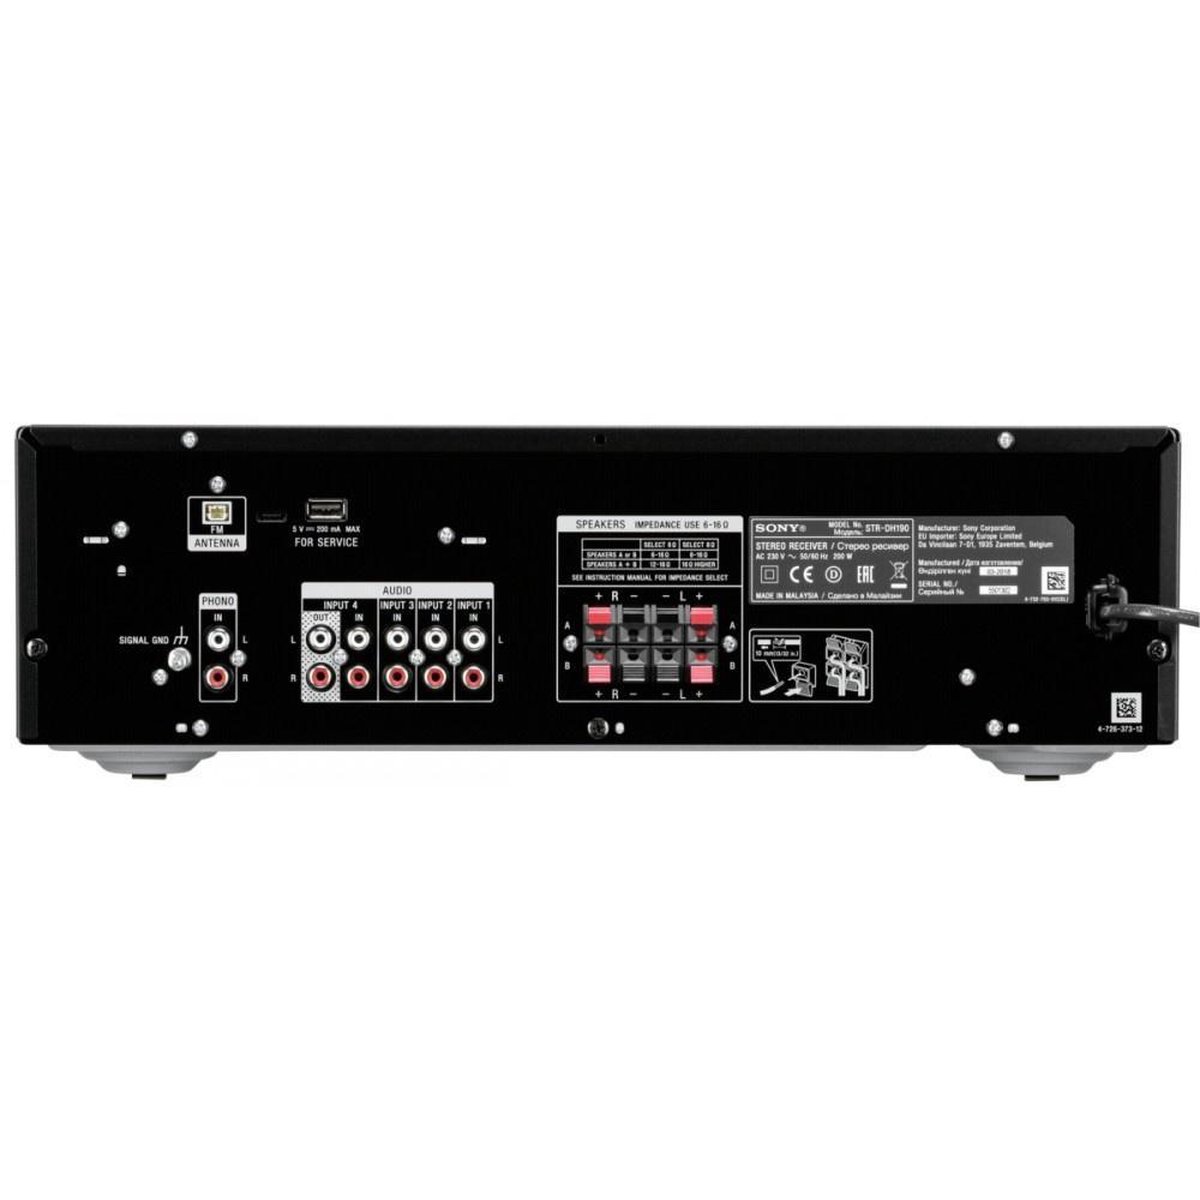 Contract Polair Voorspeller Sony STR-DH190 - Stereo-receiver met Phono | bol.com